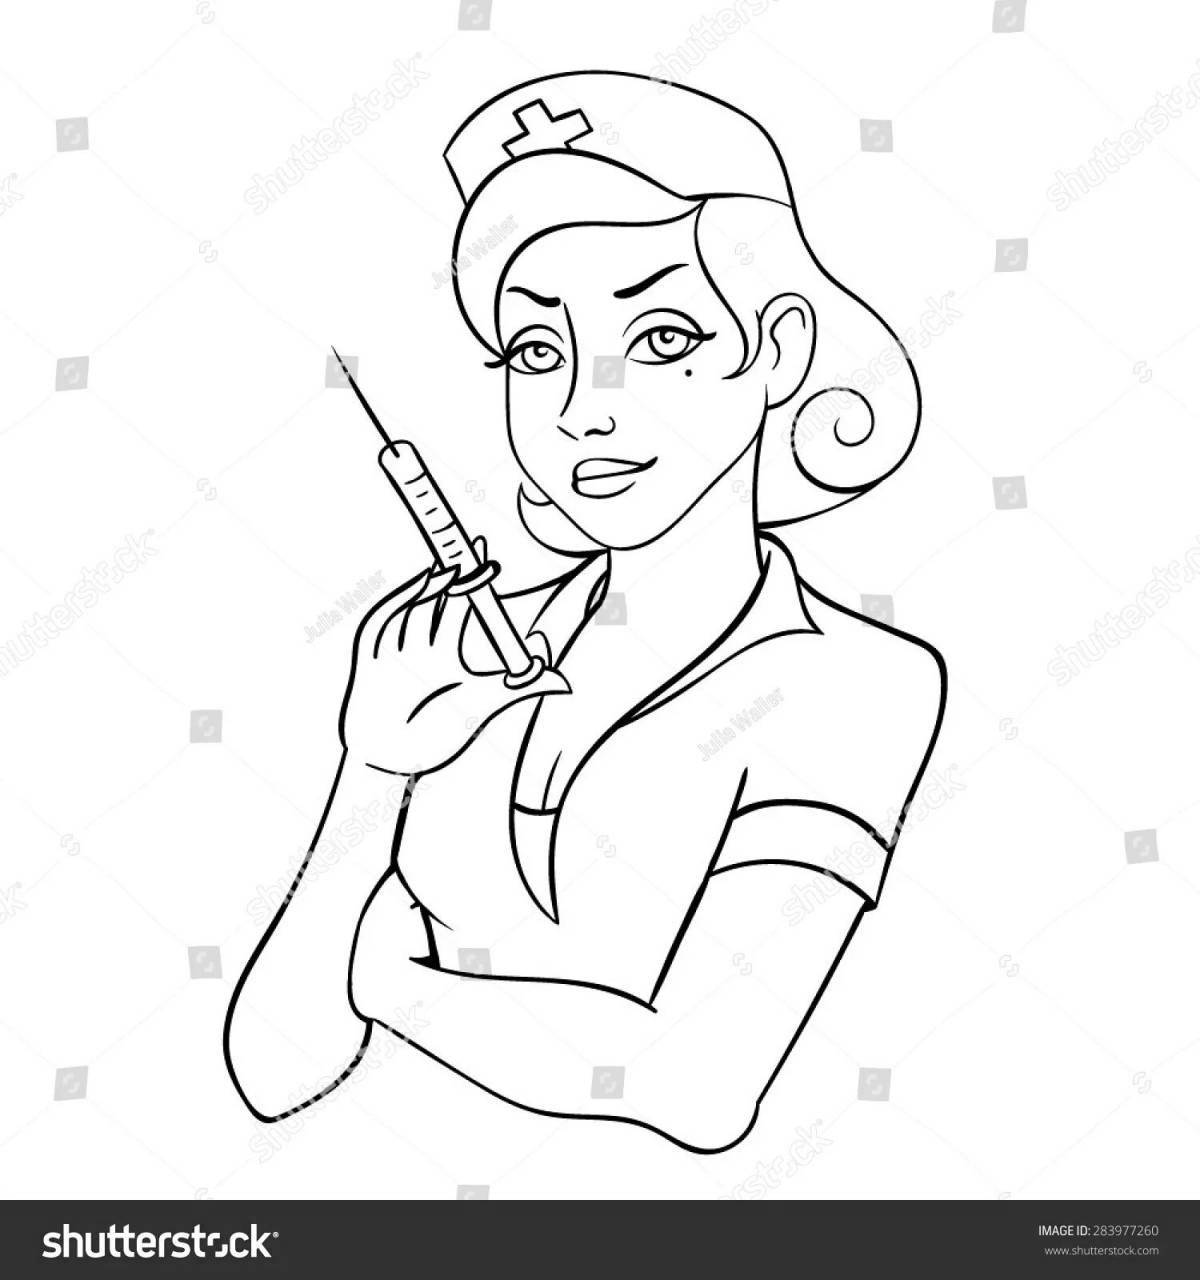 Coloring page charming military nurse